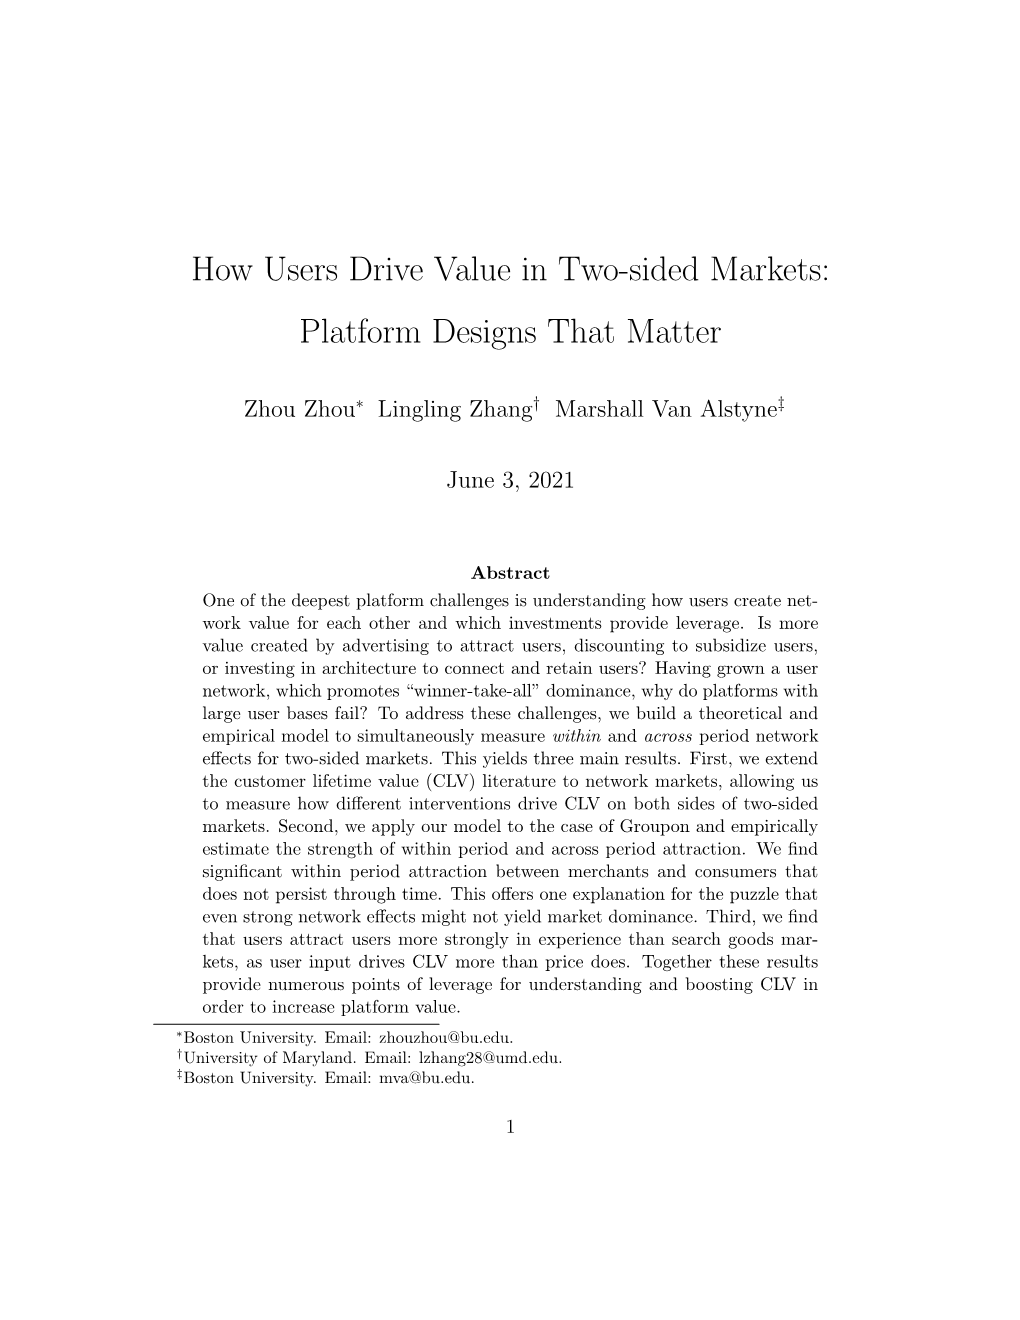 How Users Drive Value in Two-Sided Markets: Platform Designs That Matter